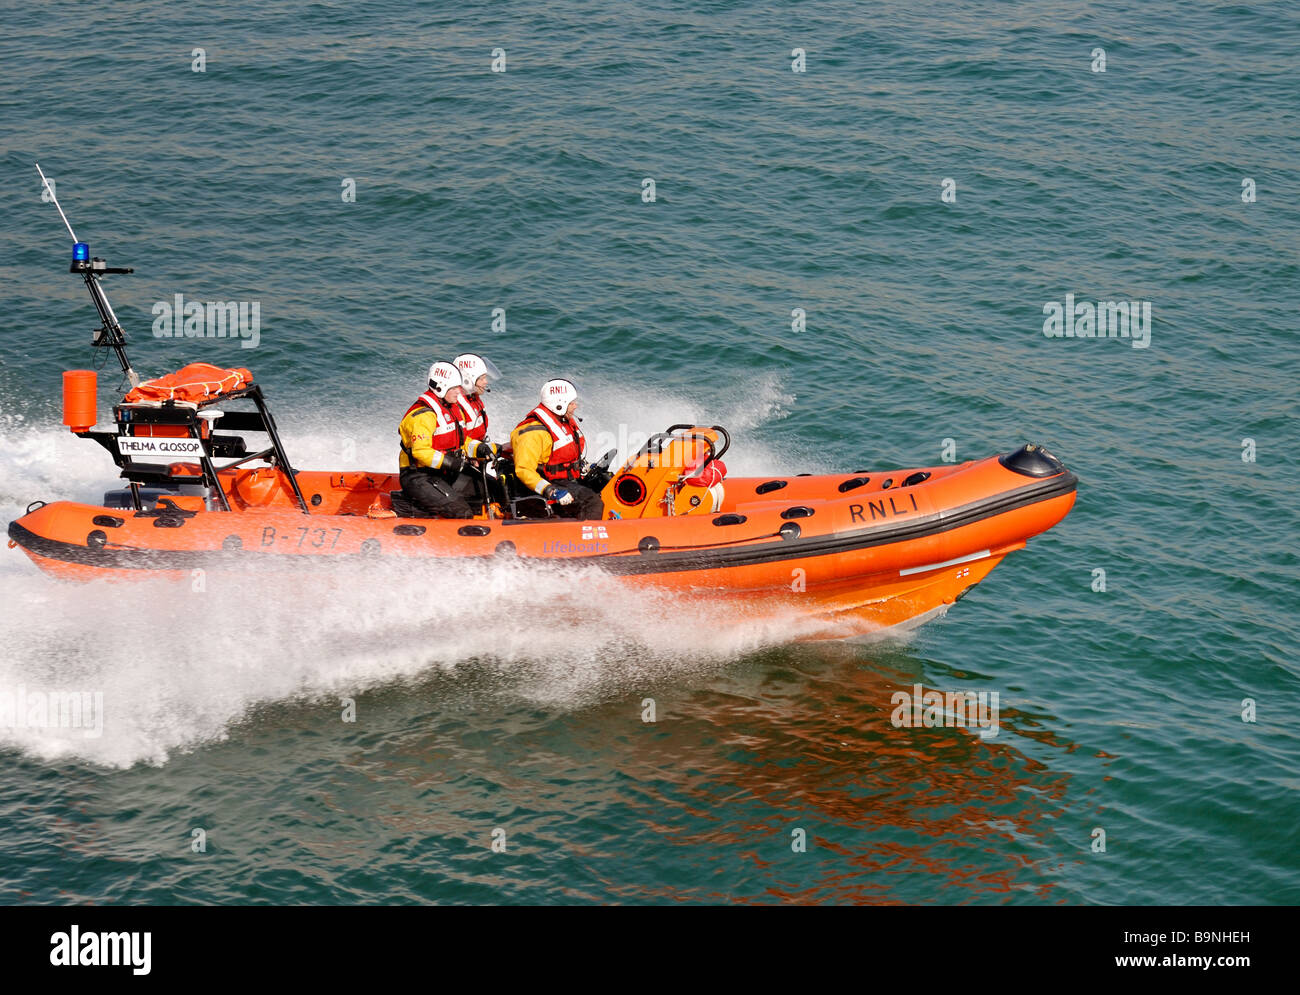 RNLI Lifeboat responding to an emergency Stock Photo